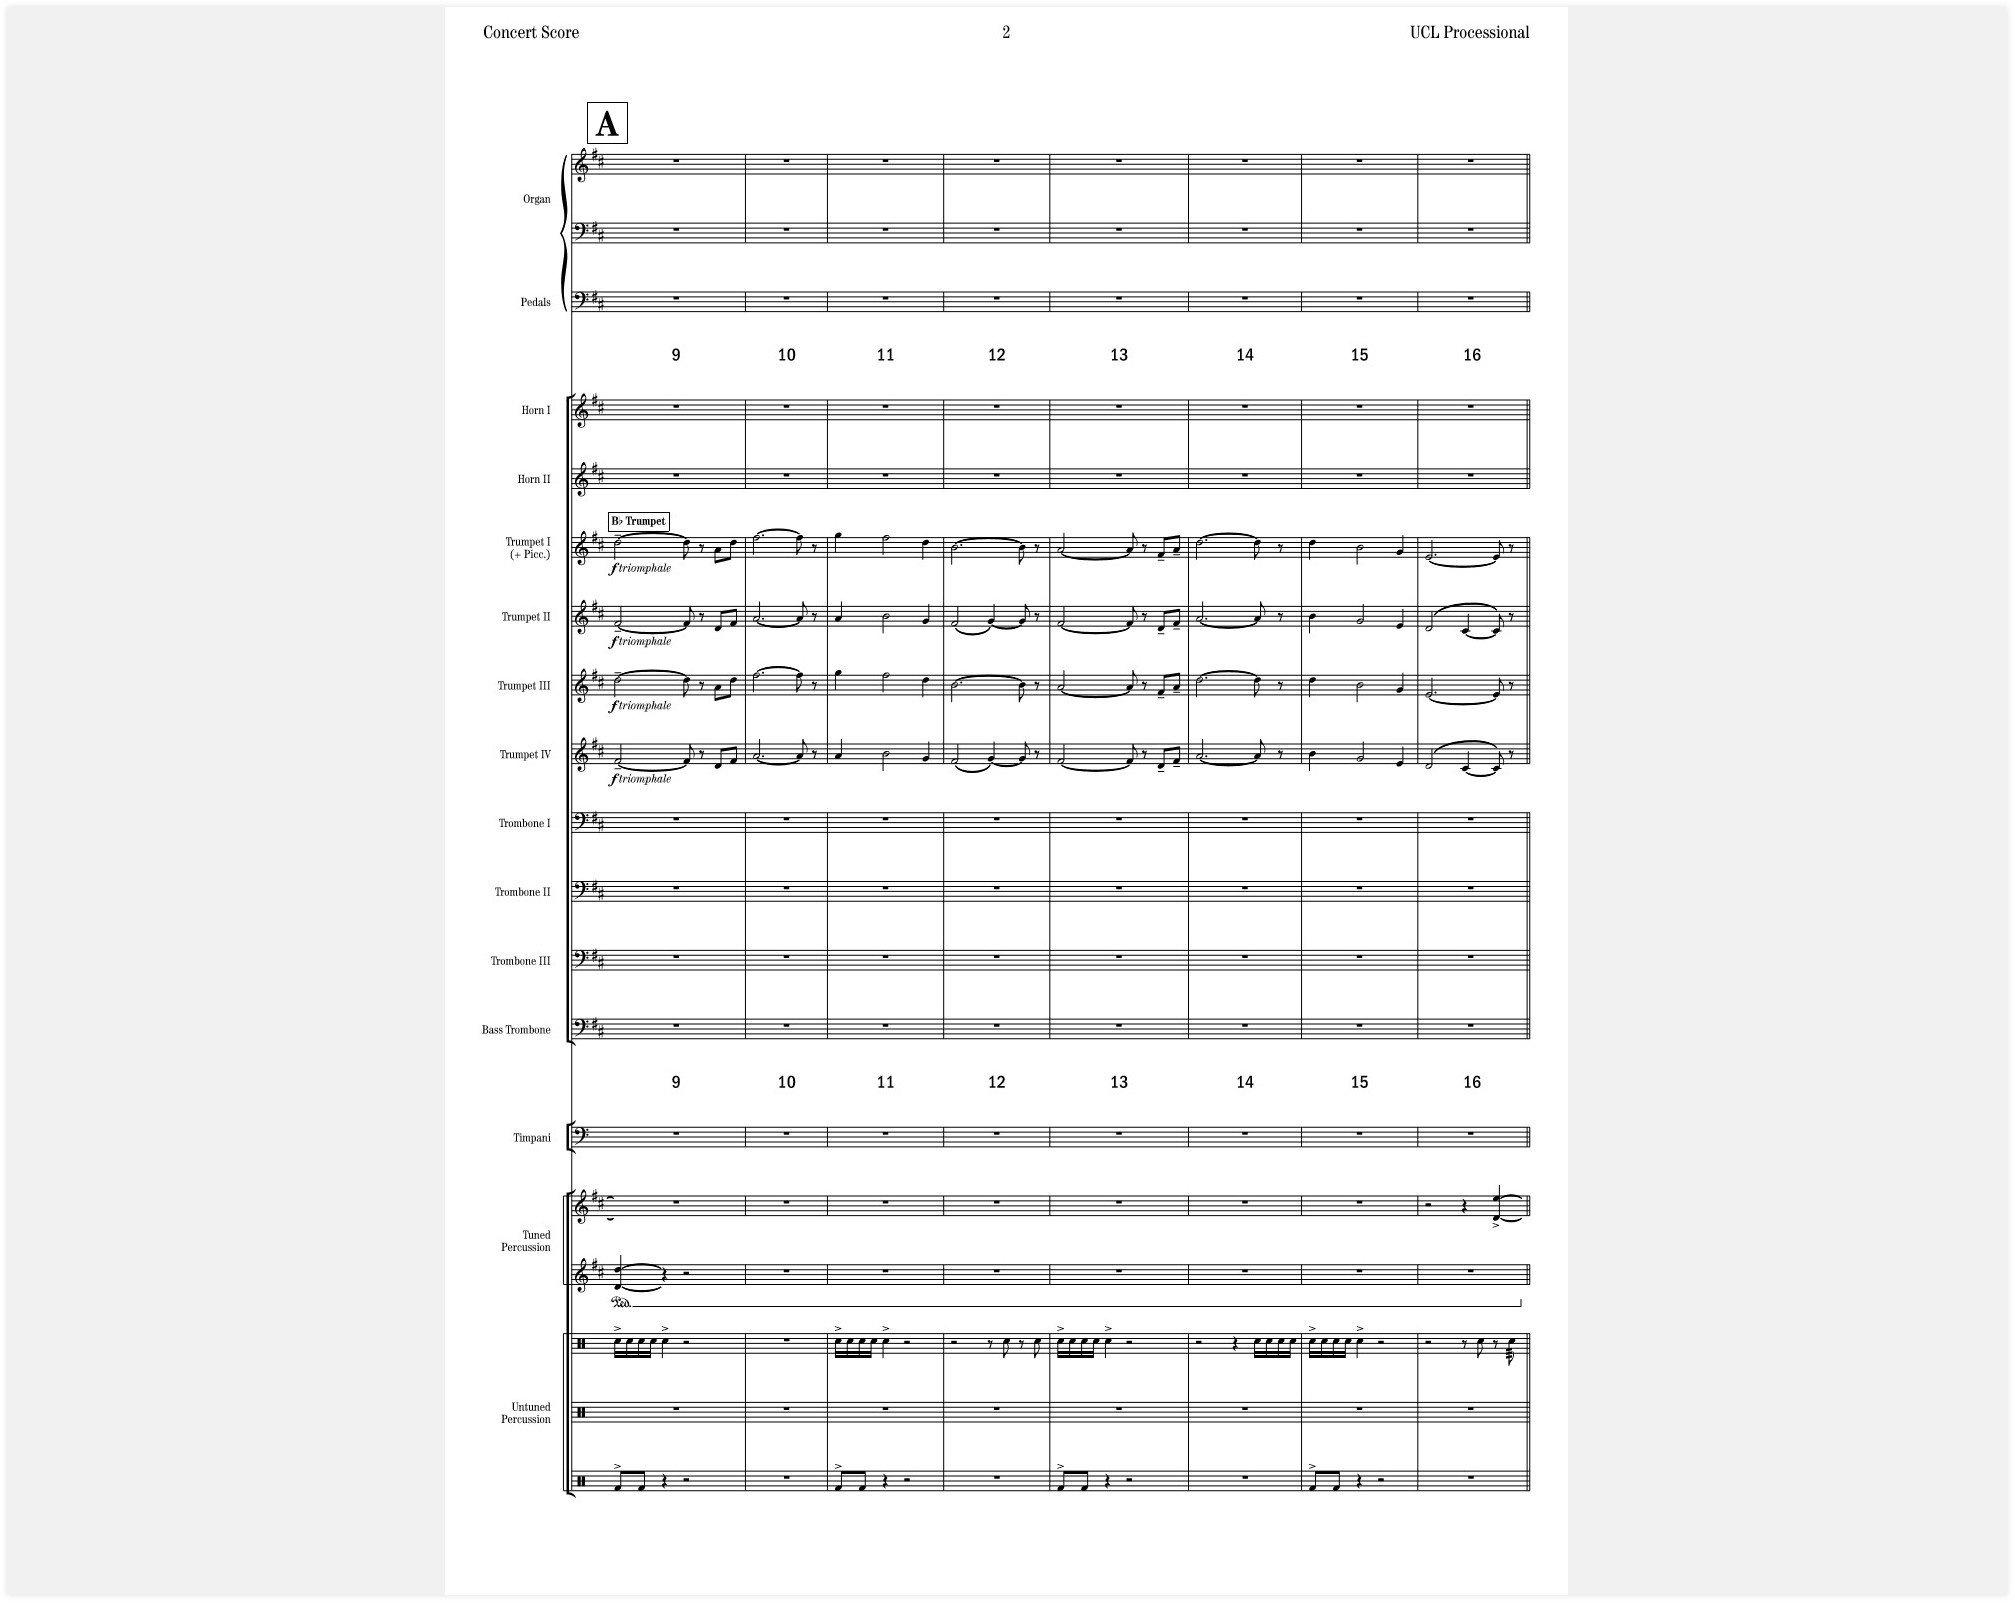 Processional and Recessional (Faber) - Concert Score_4.jpg